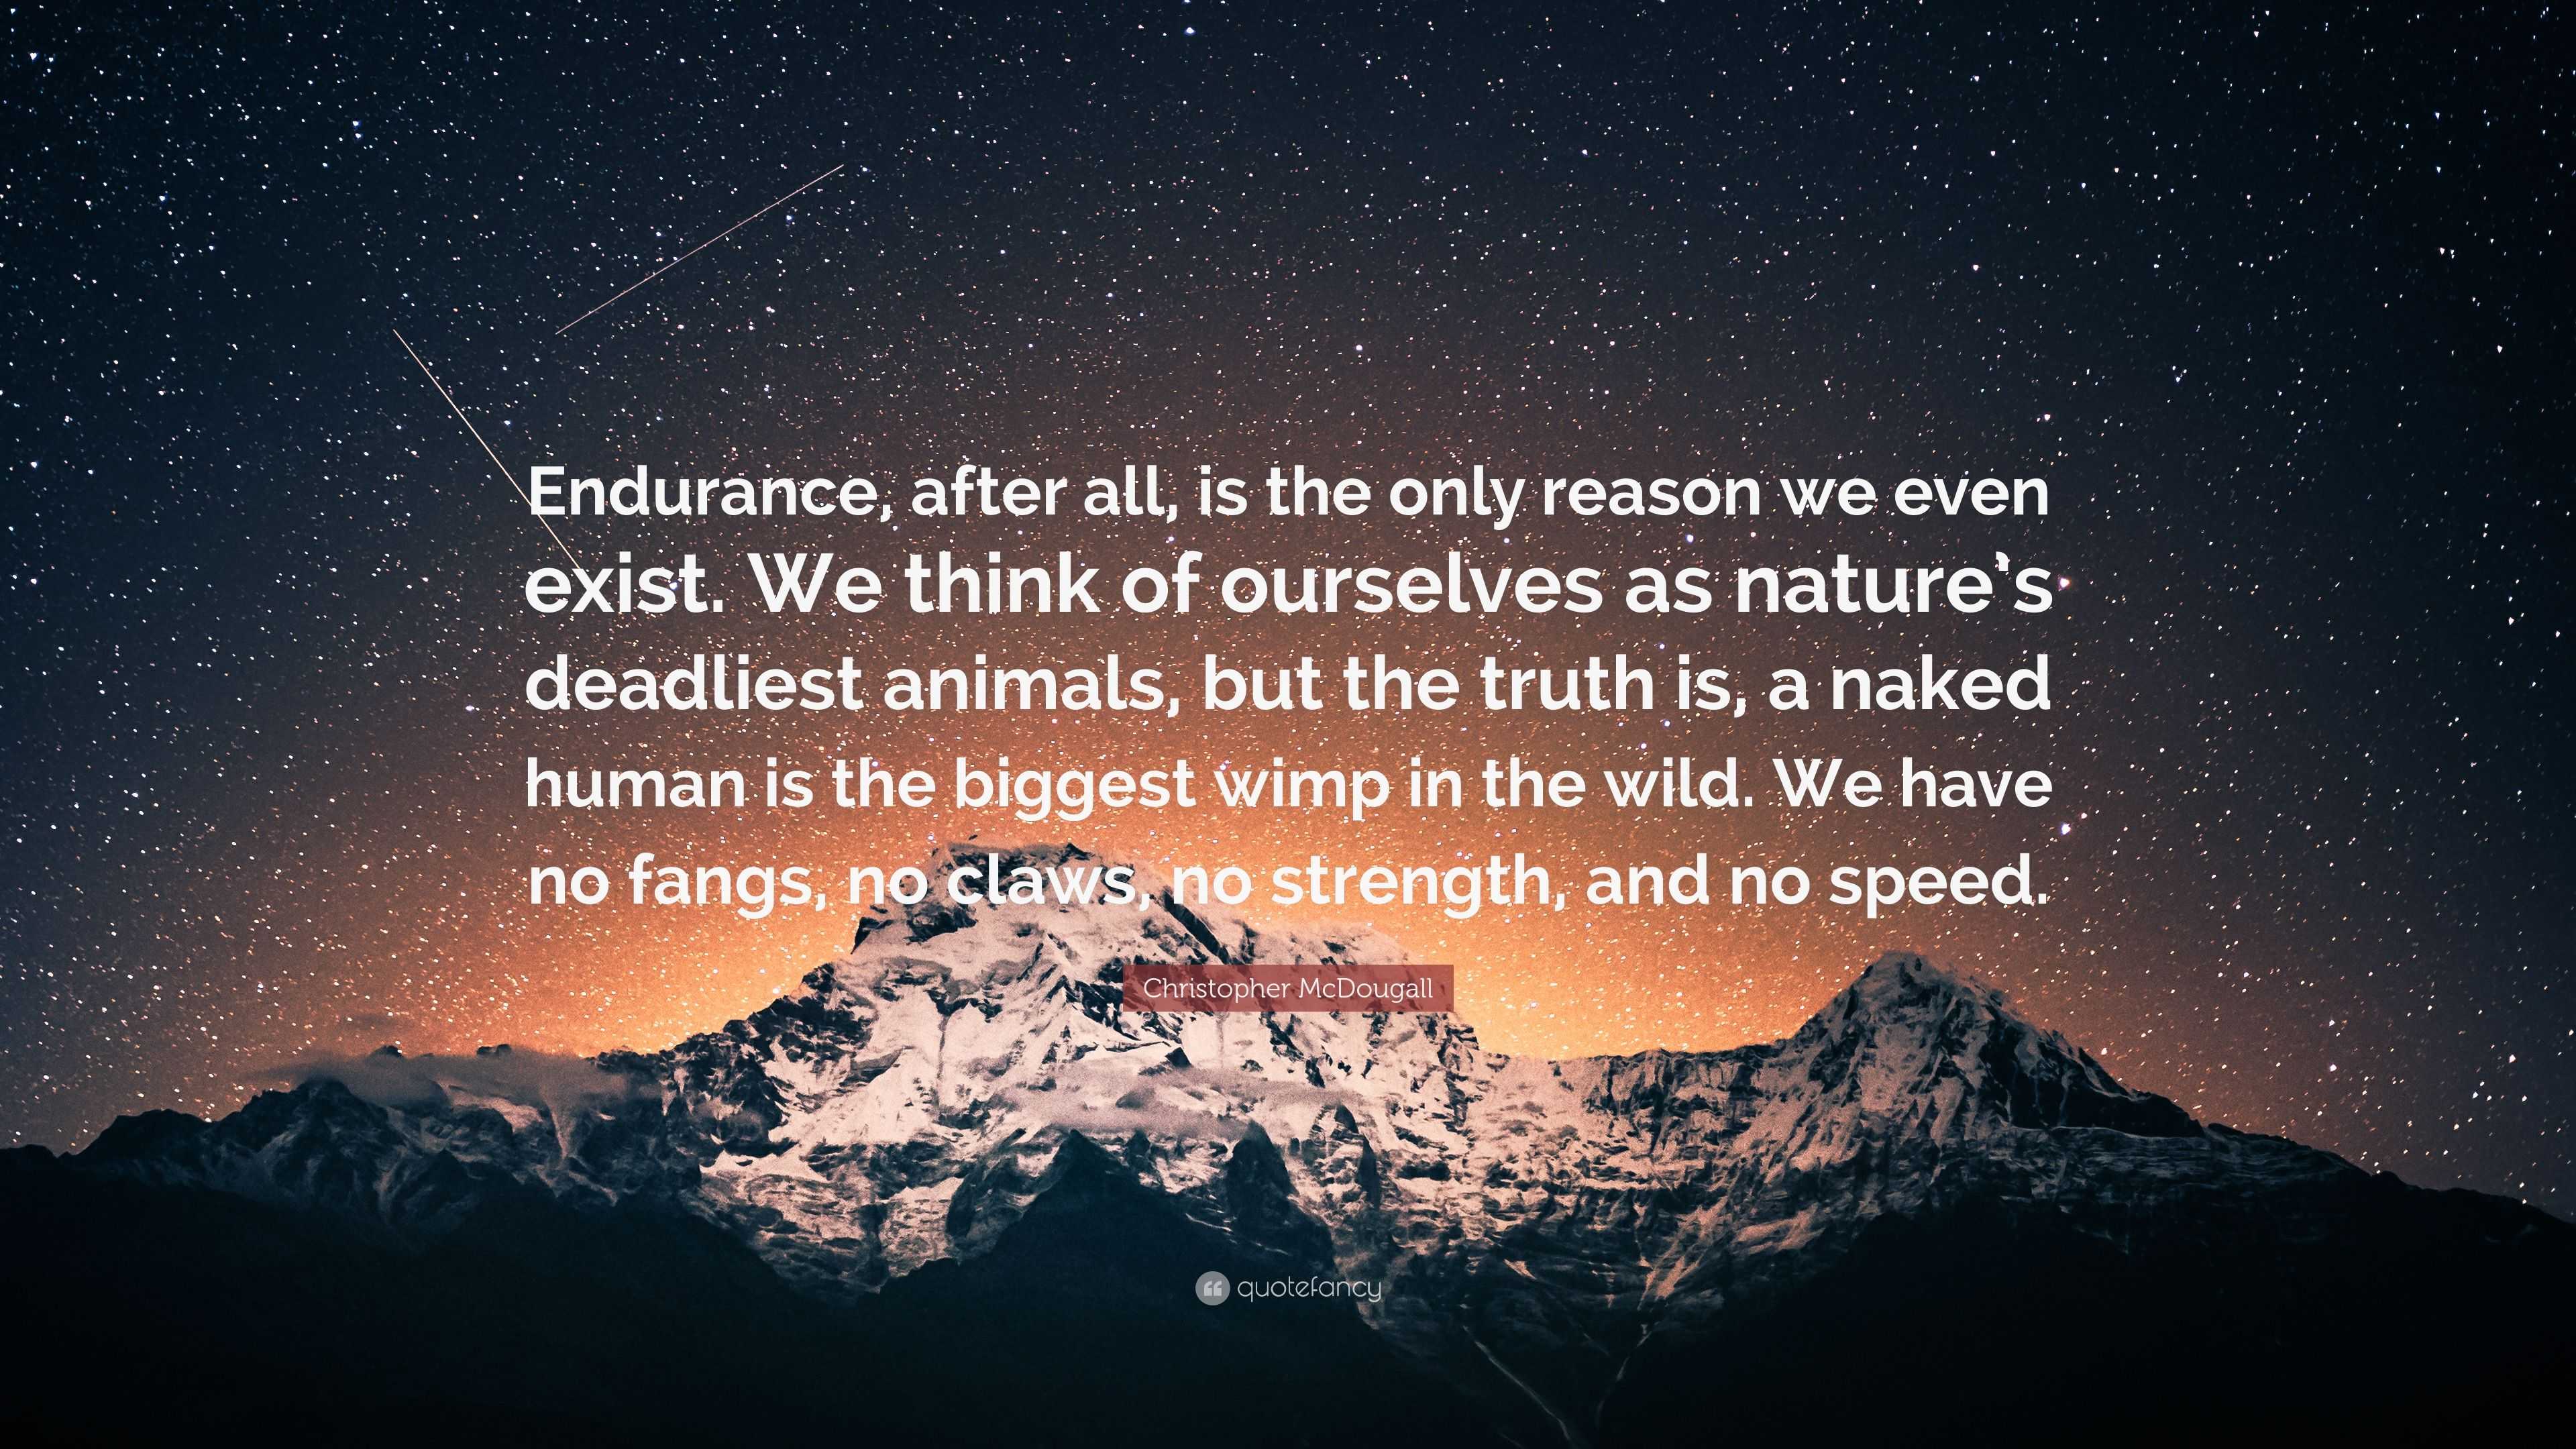 About Endurance